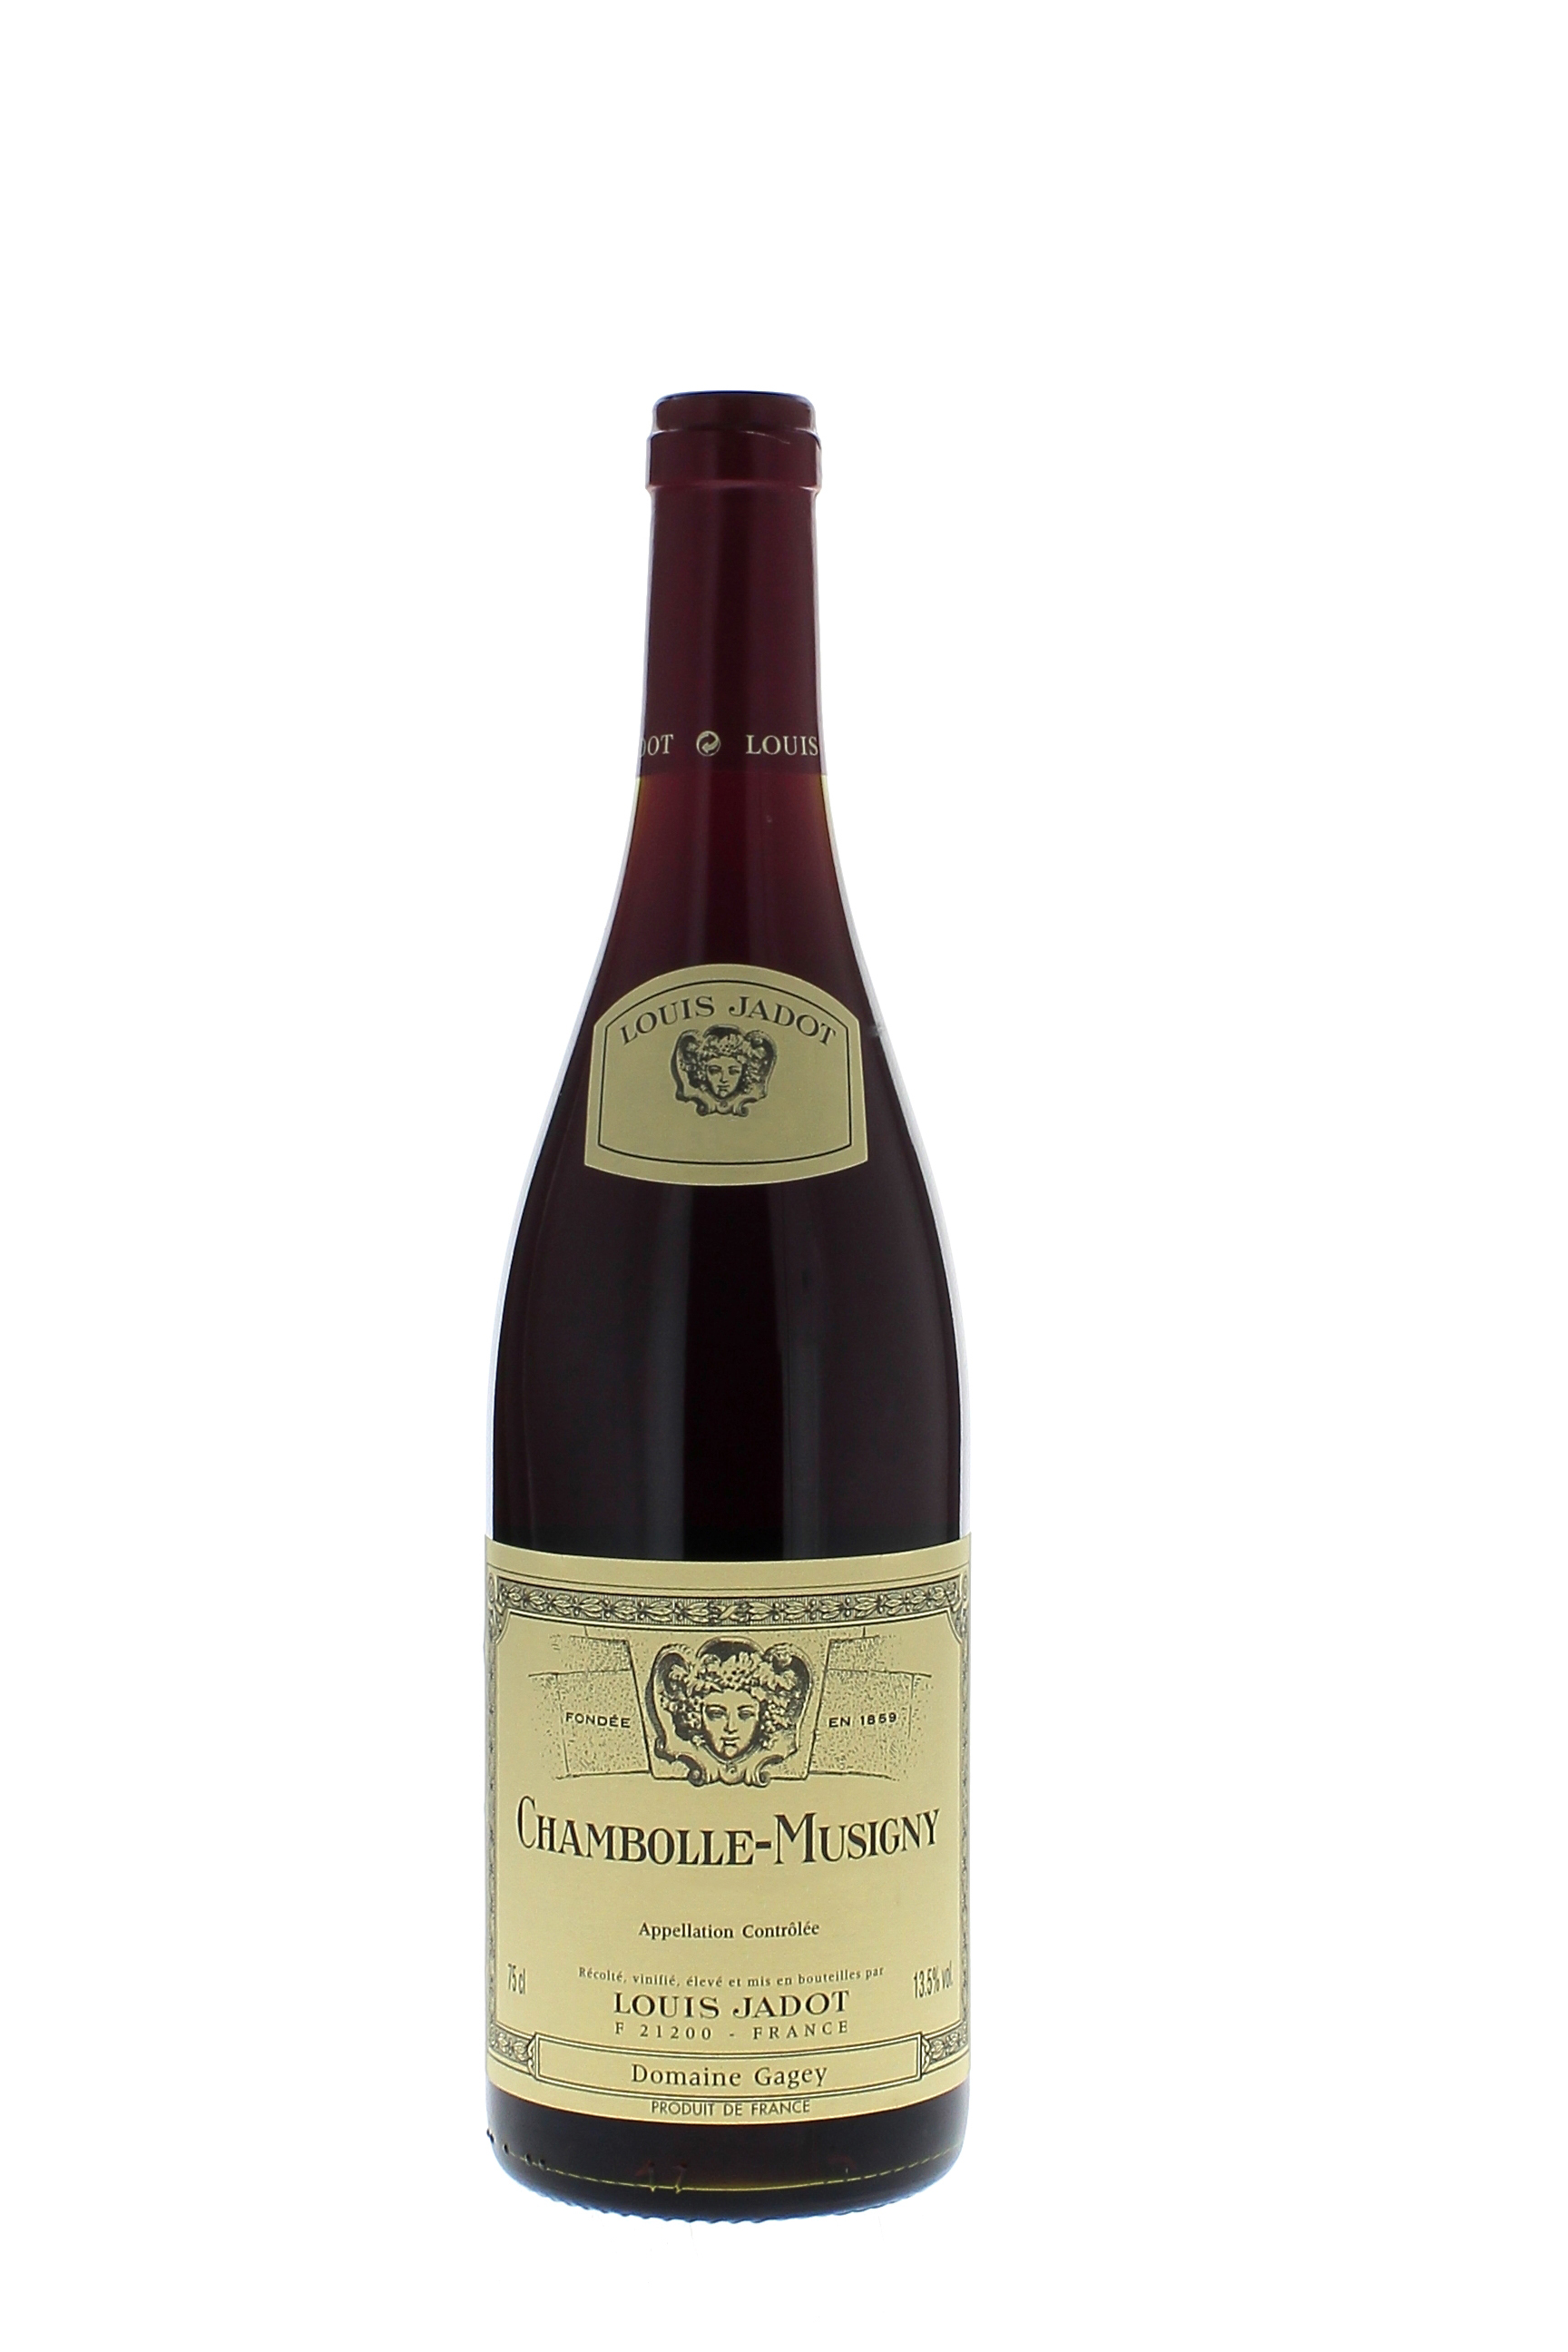 Chambolle musigny les fues 2009  JADOT Louis, Bourgogne rouge